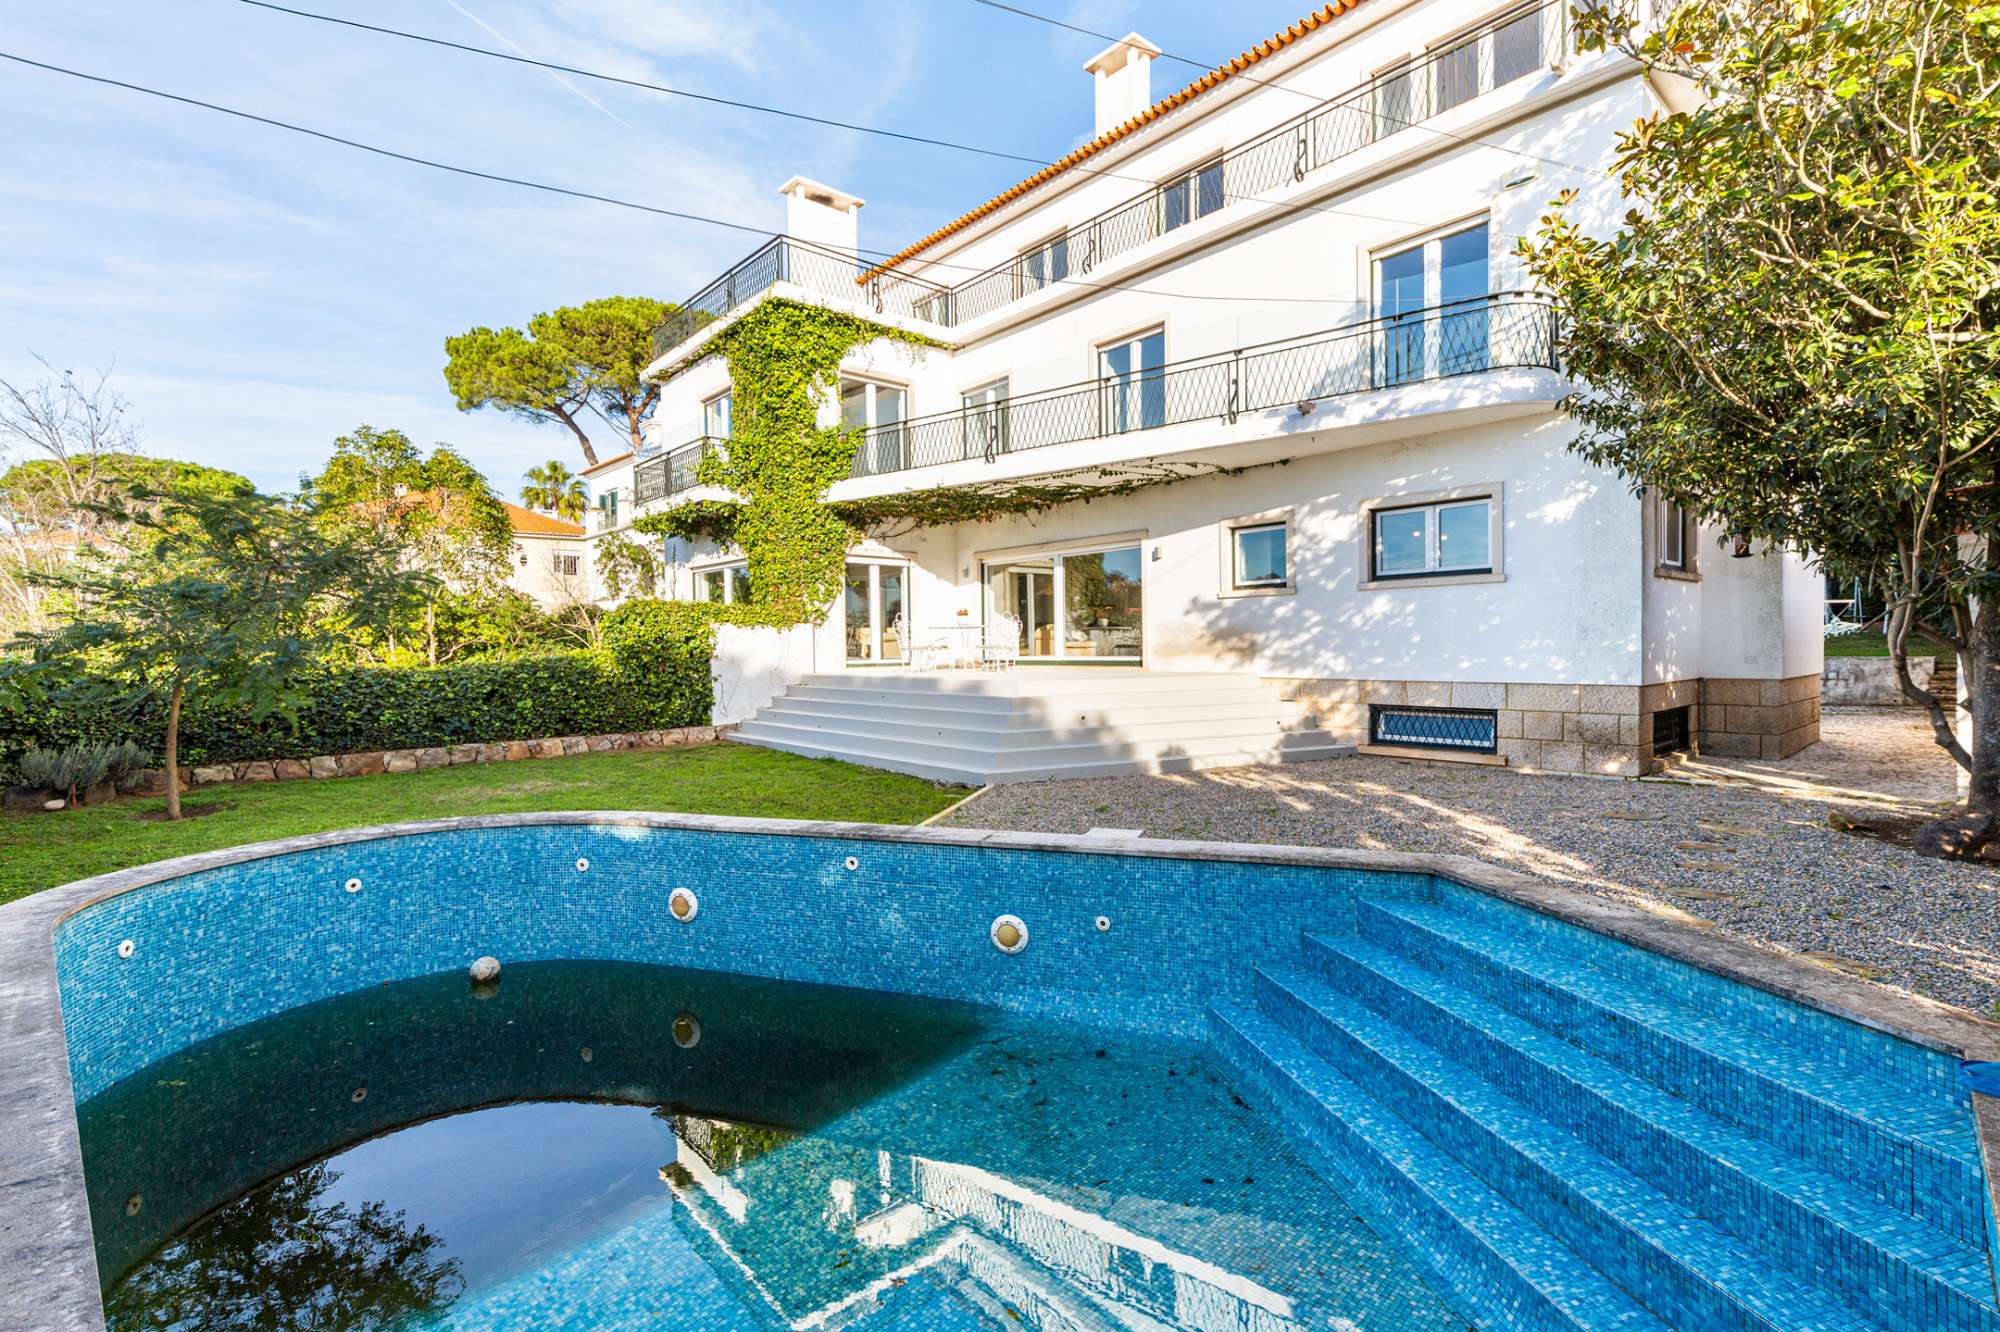 5-bedroom villa for rent with garden and pool in Estoril